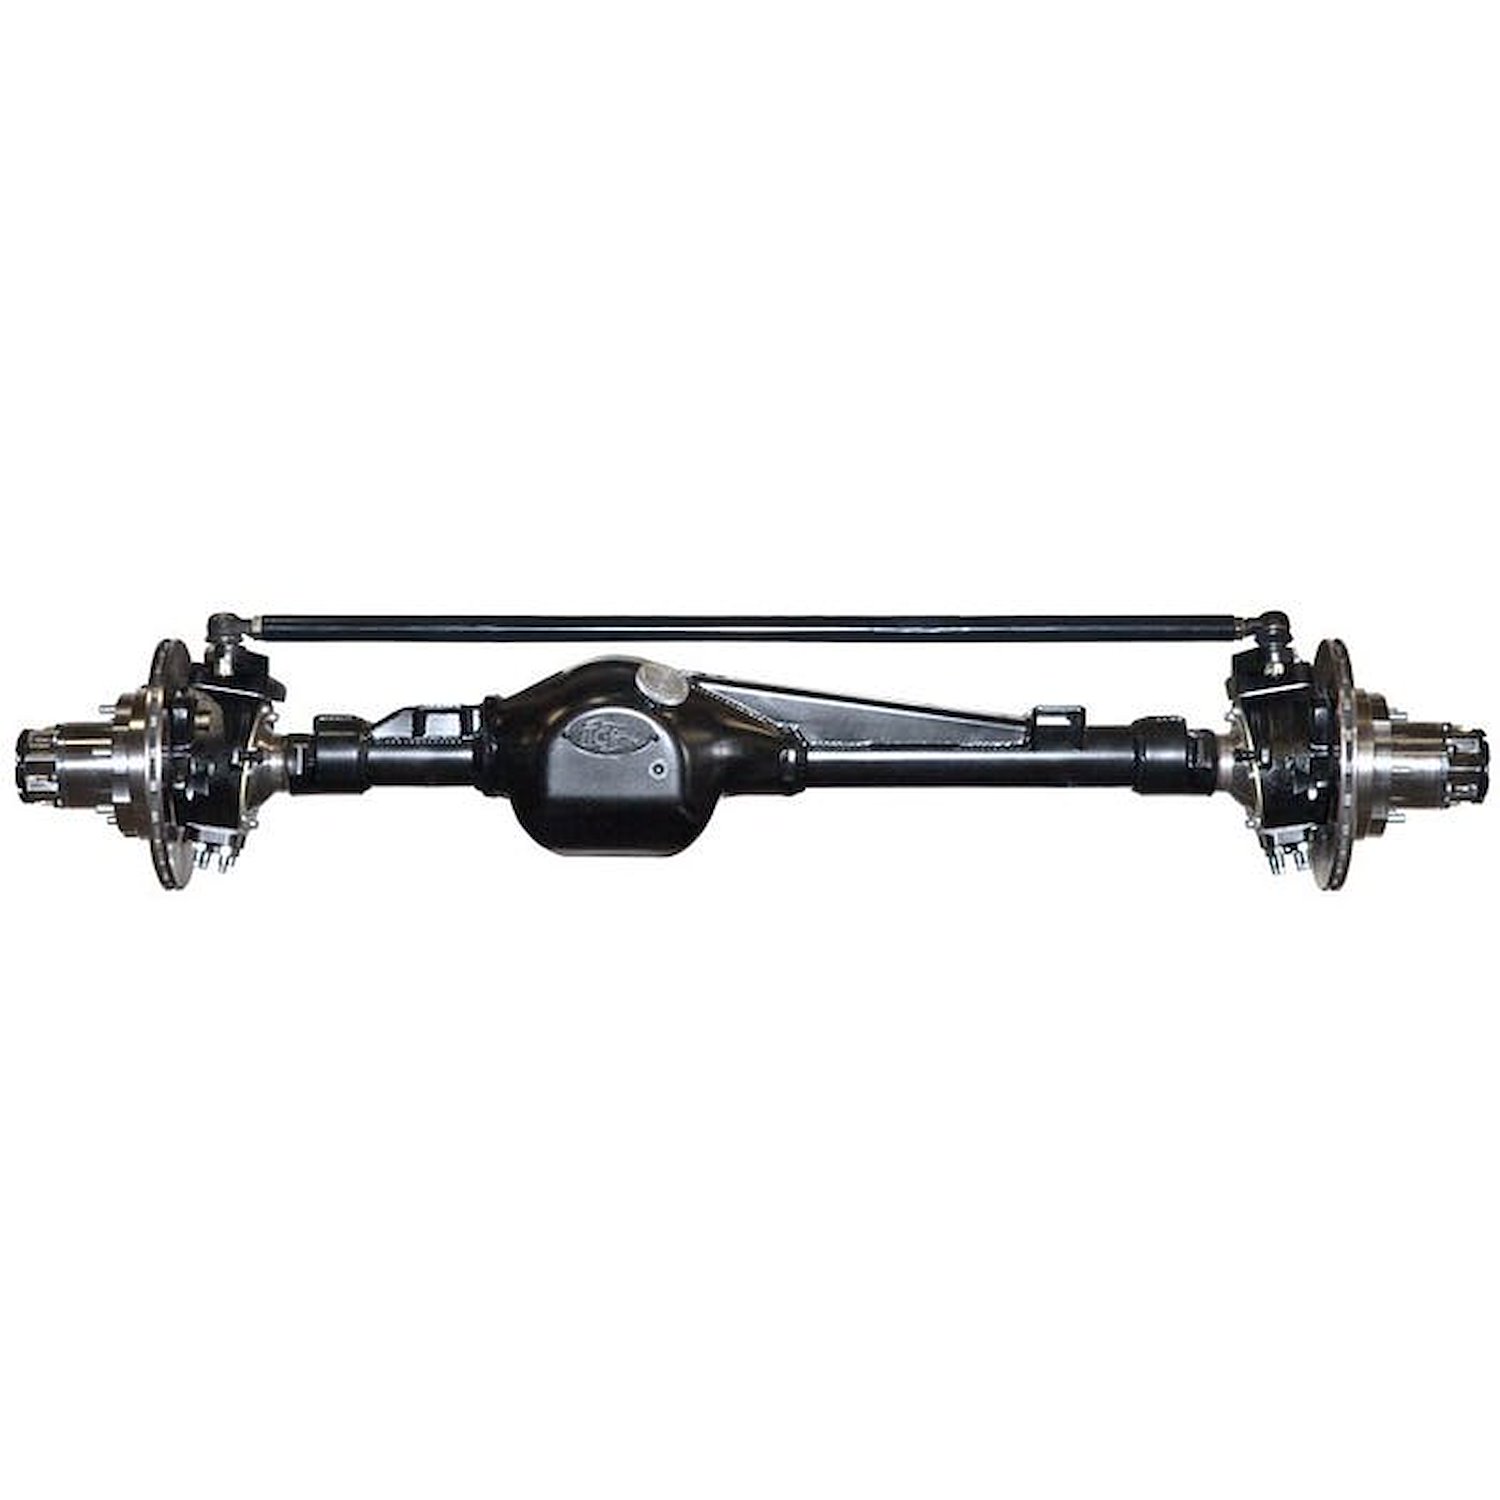 301657-1-KIT Rock Assault Fully-Built Front Axles, +5 Width, RHD, High-Pinion, 4.88, Grizzly, Locking Hubs, Toyota